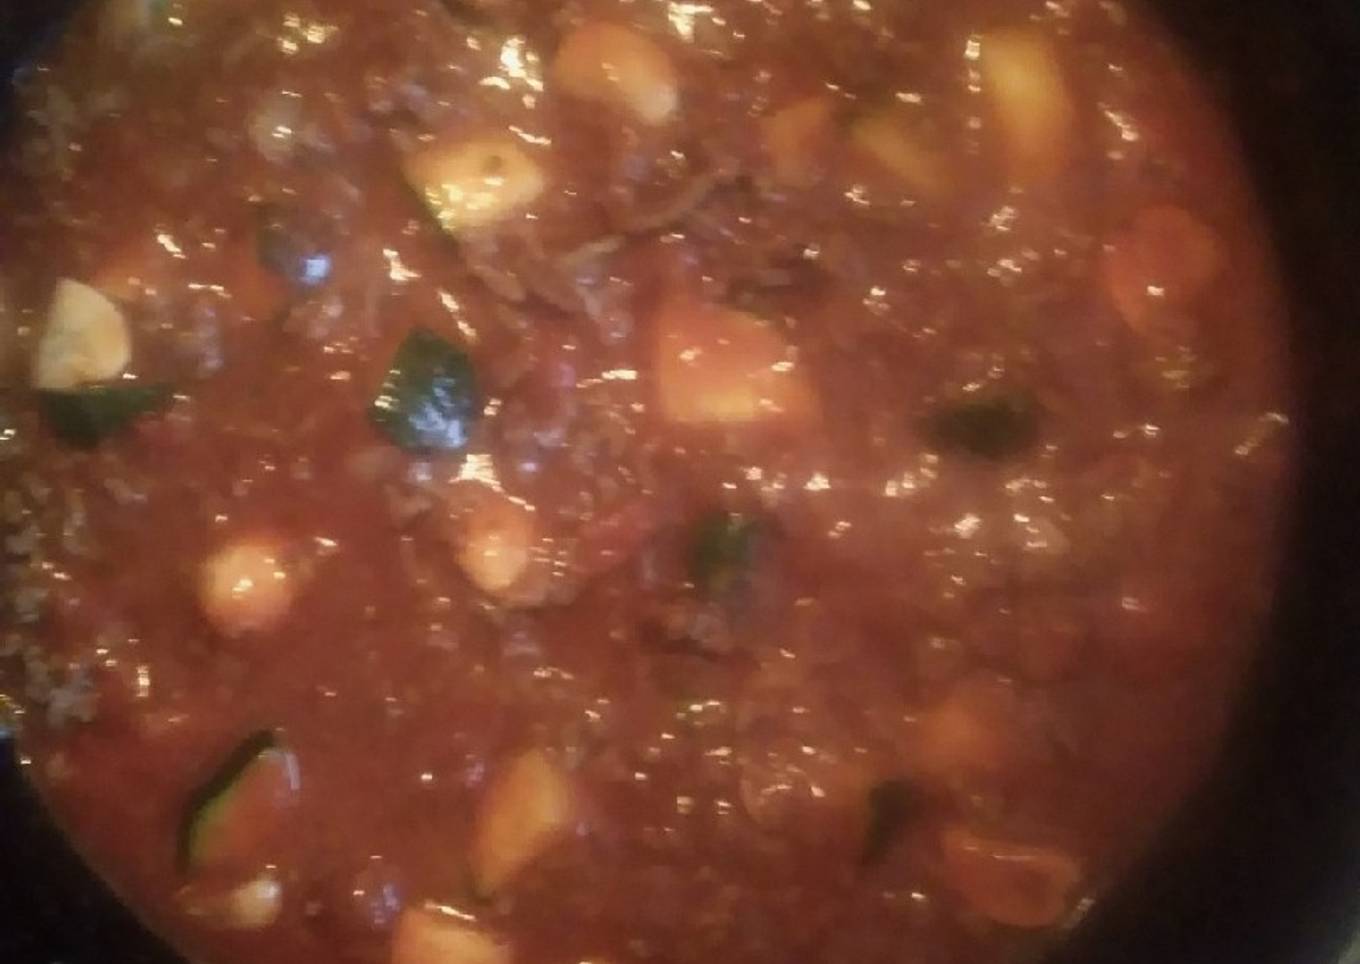 Beef mincemeat, courgettes and mushrooms Bolognaise Sauce